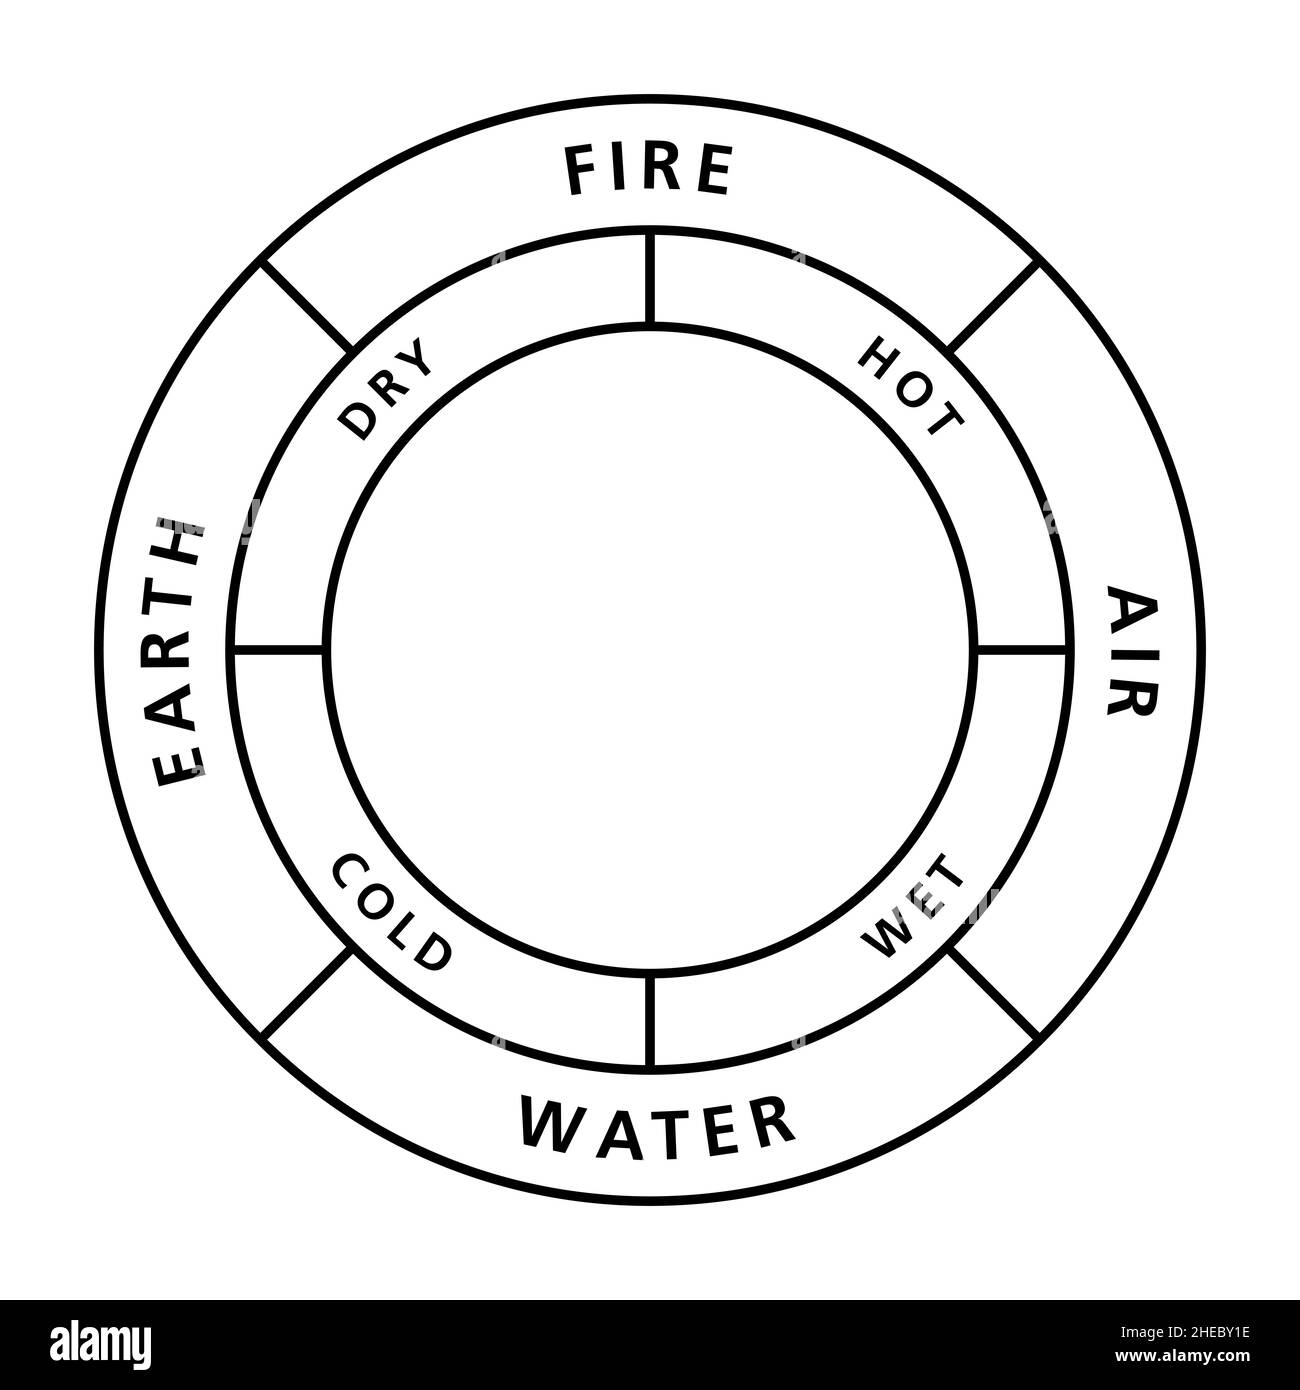 Circle of the classical four elements fire, earth, water and air, with their qualities hot, dry, cold and wet. Stock Photo